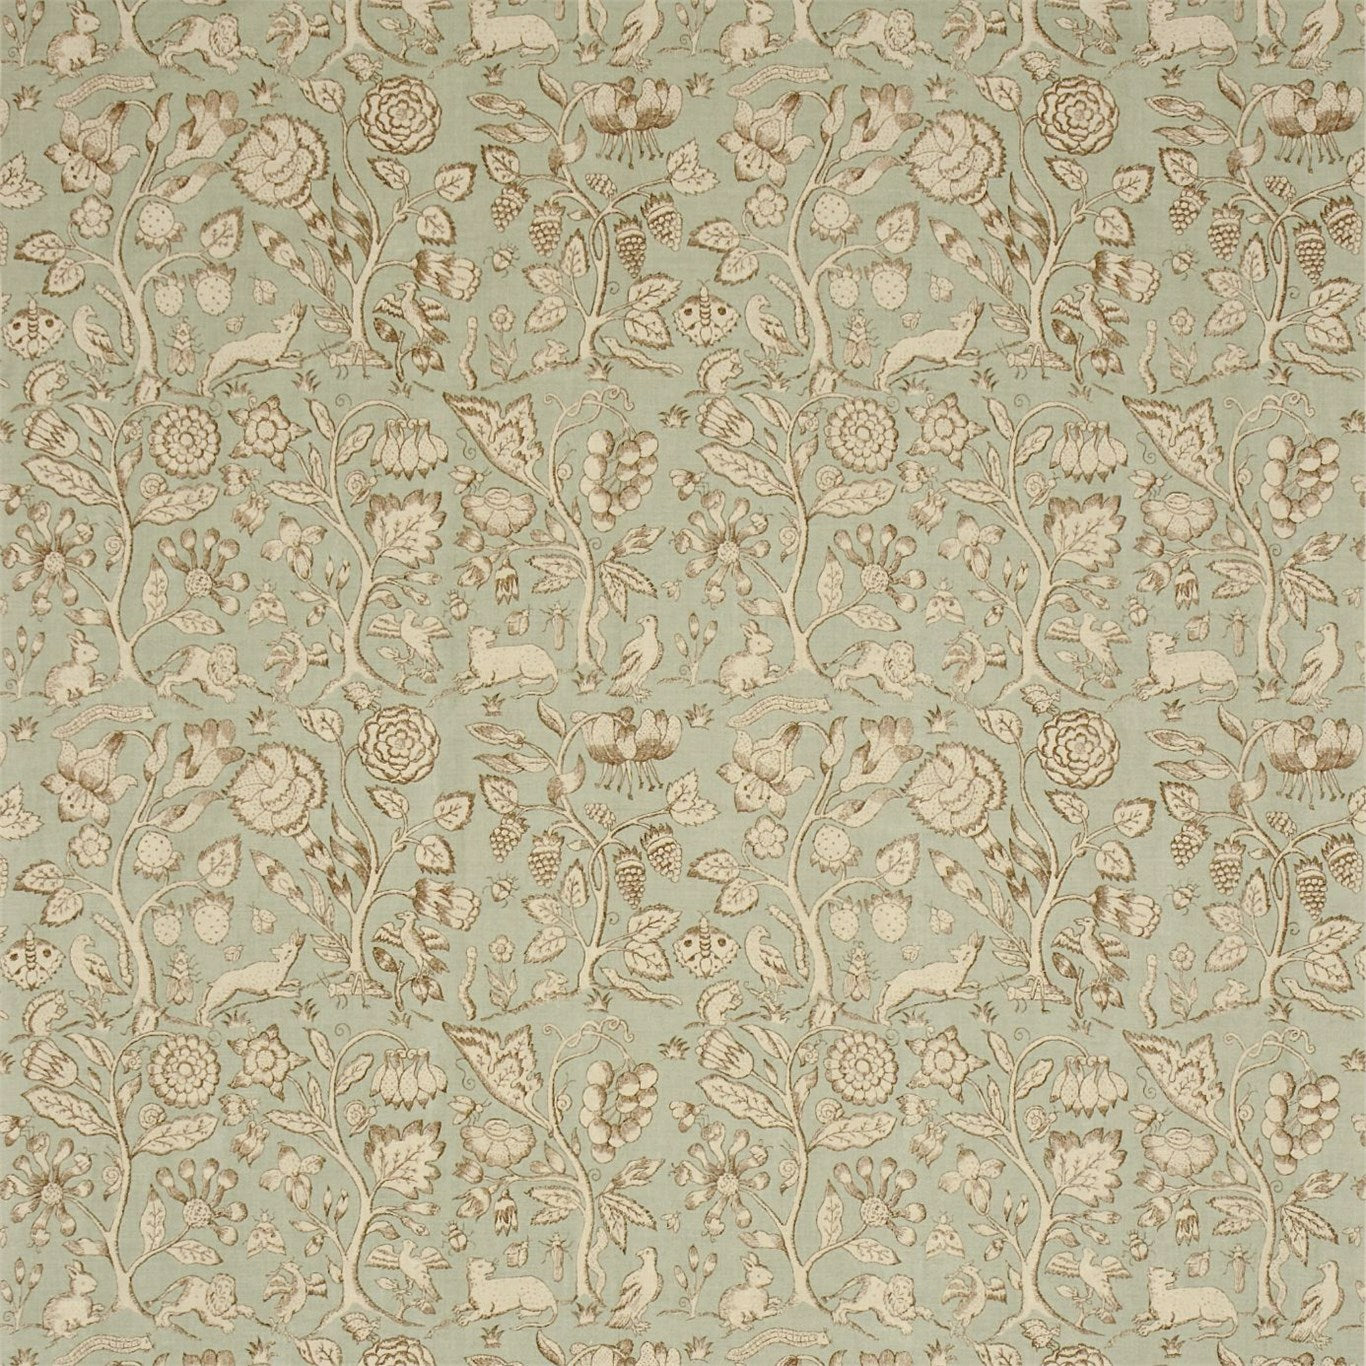 Beaufort Fabric by Sanderson - DCOUBE202 - Duck Egg/Camel